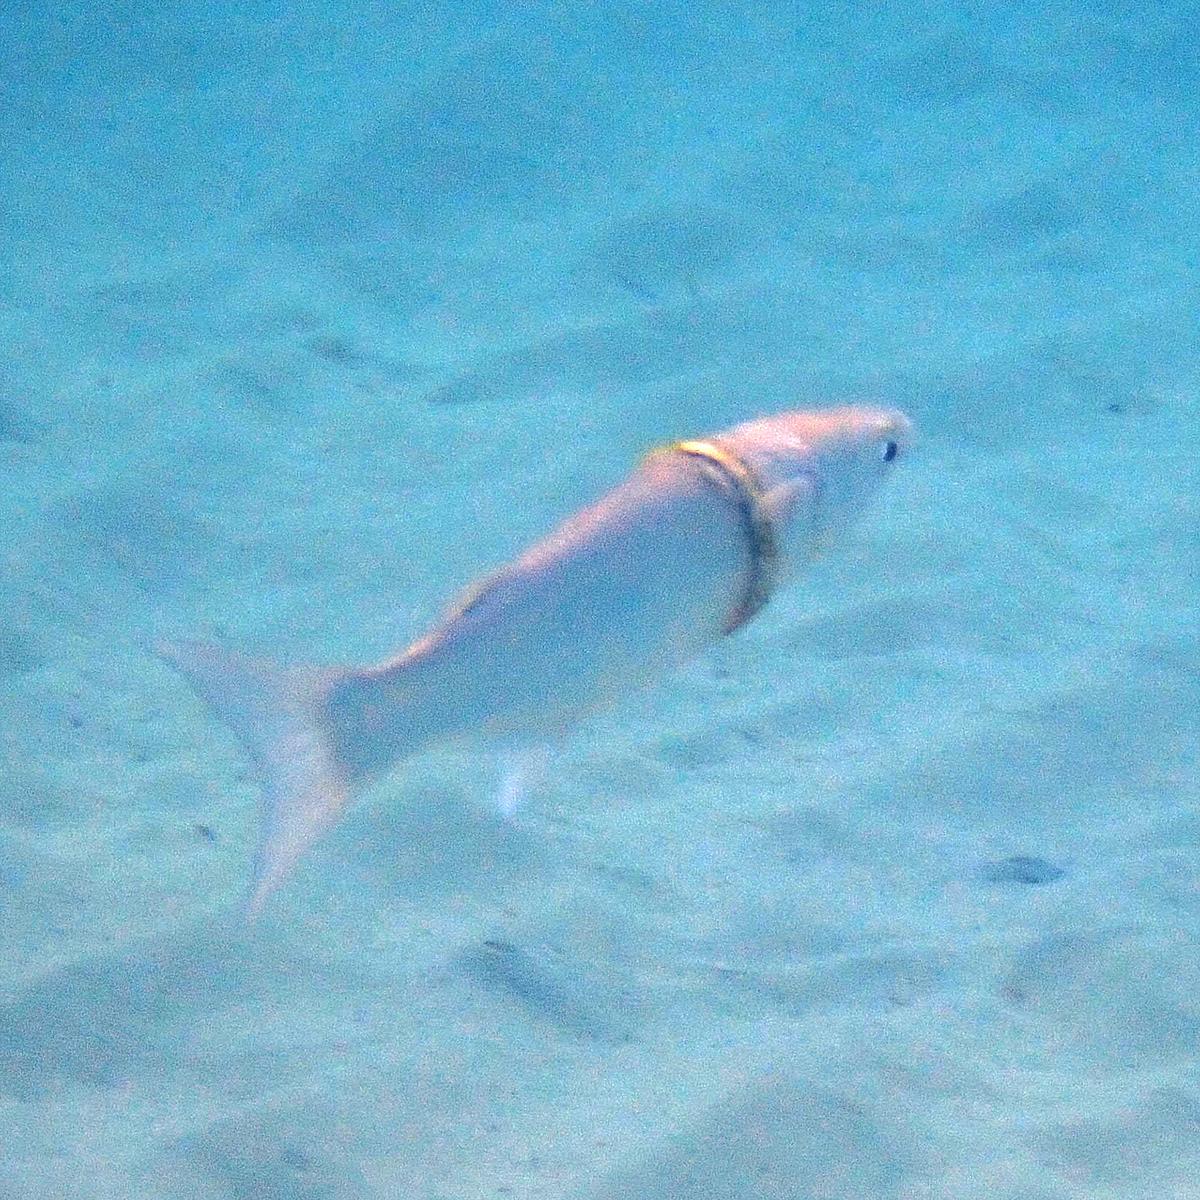 A photo of the sand mullet with the wedding band stuck around its body. (Courtesy of <a href="https://www.norfolkislandtime.com/">Norfolk Island Time</a>)